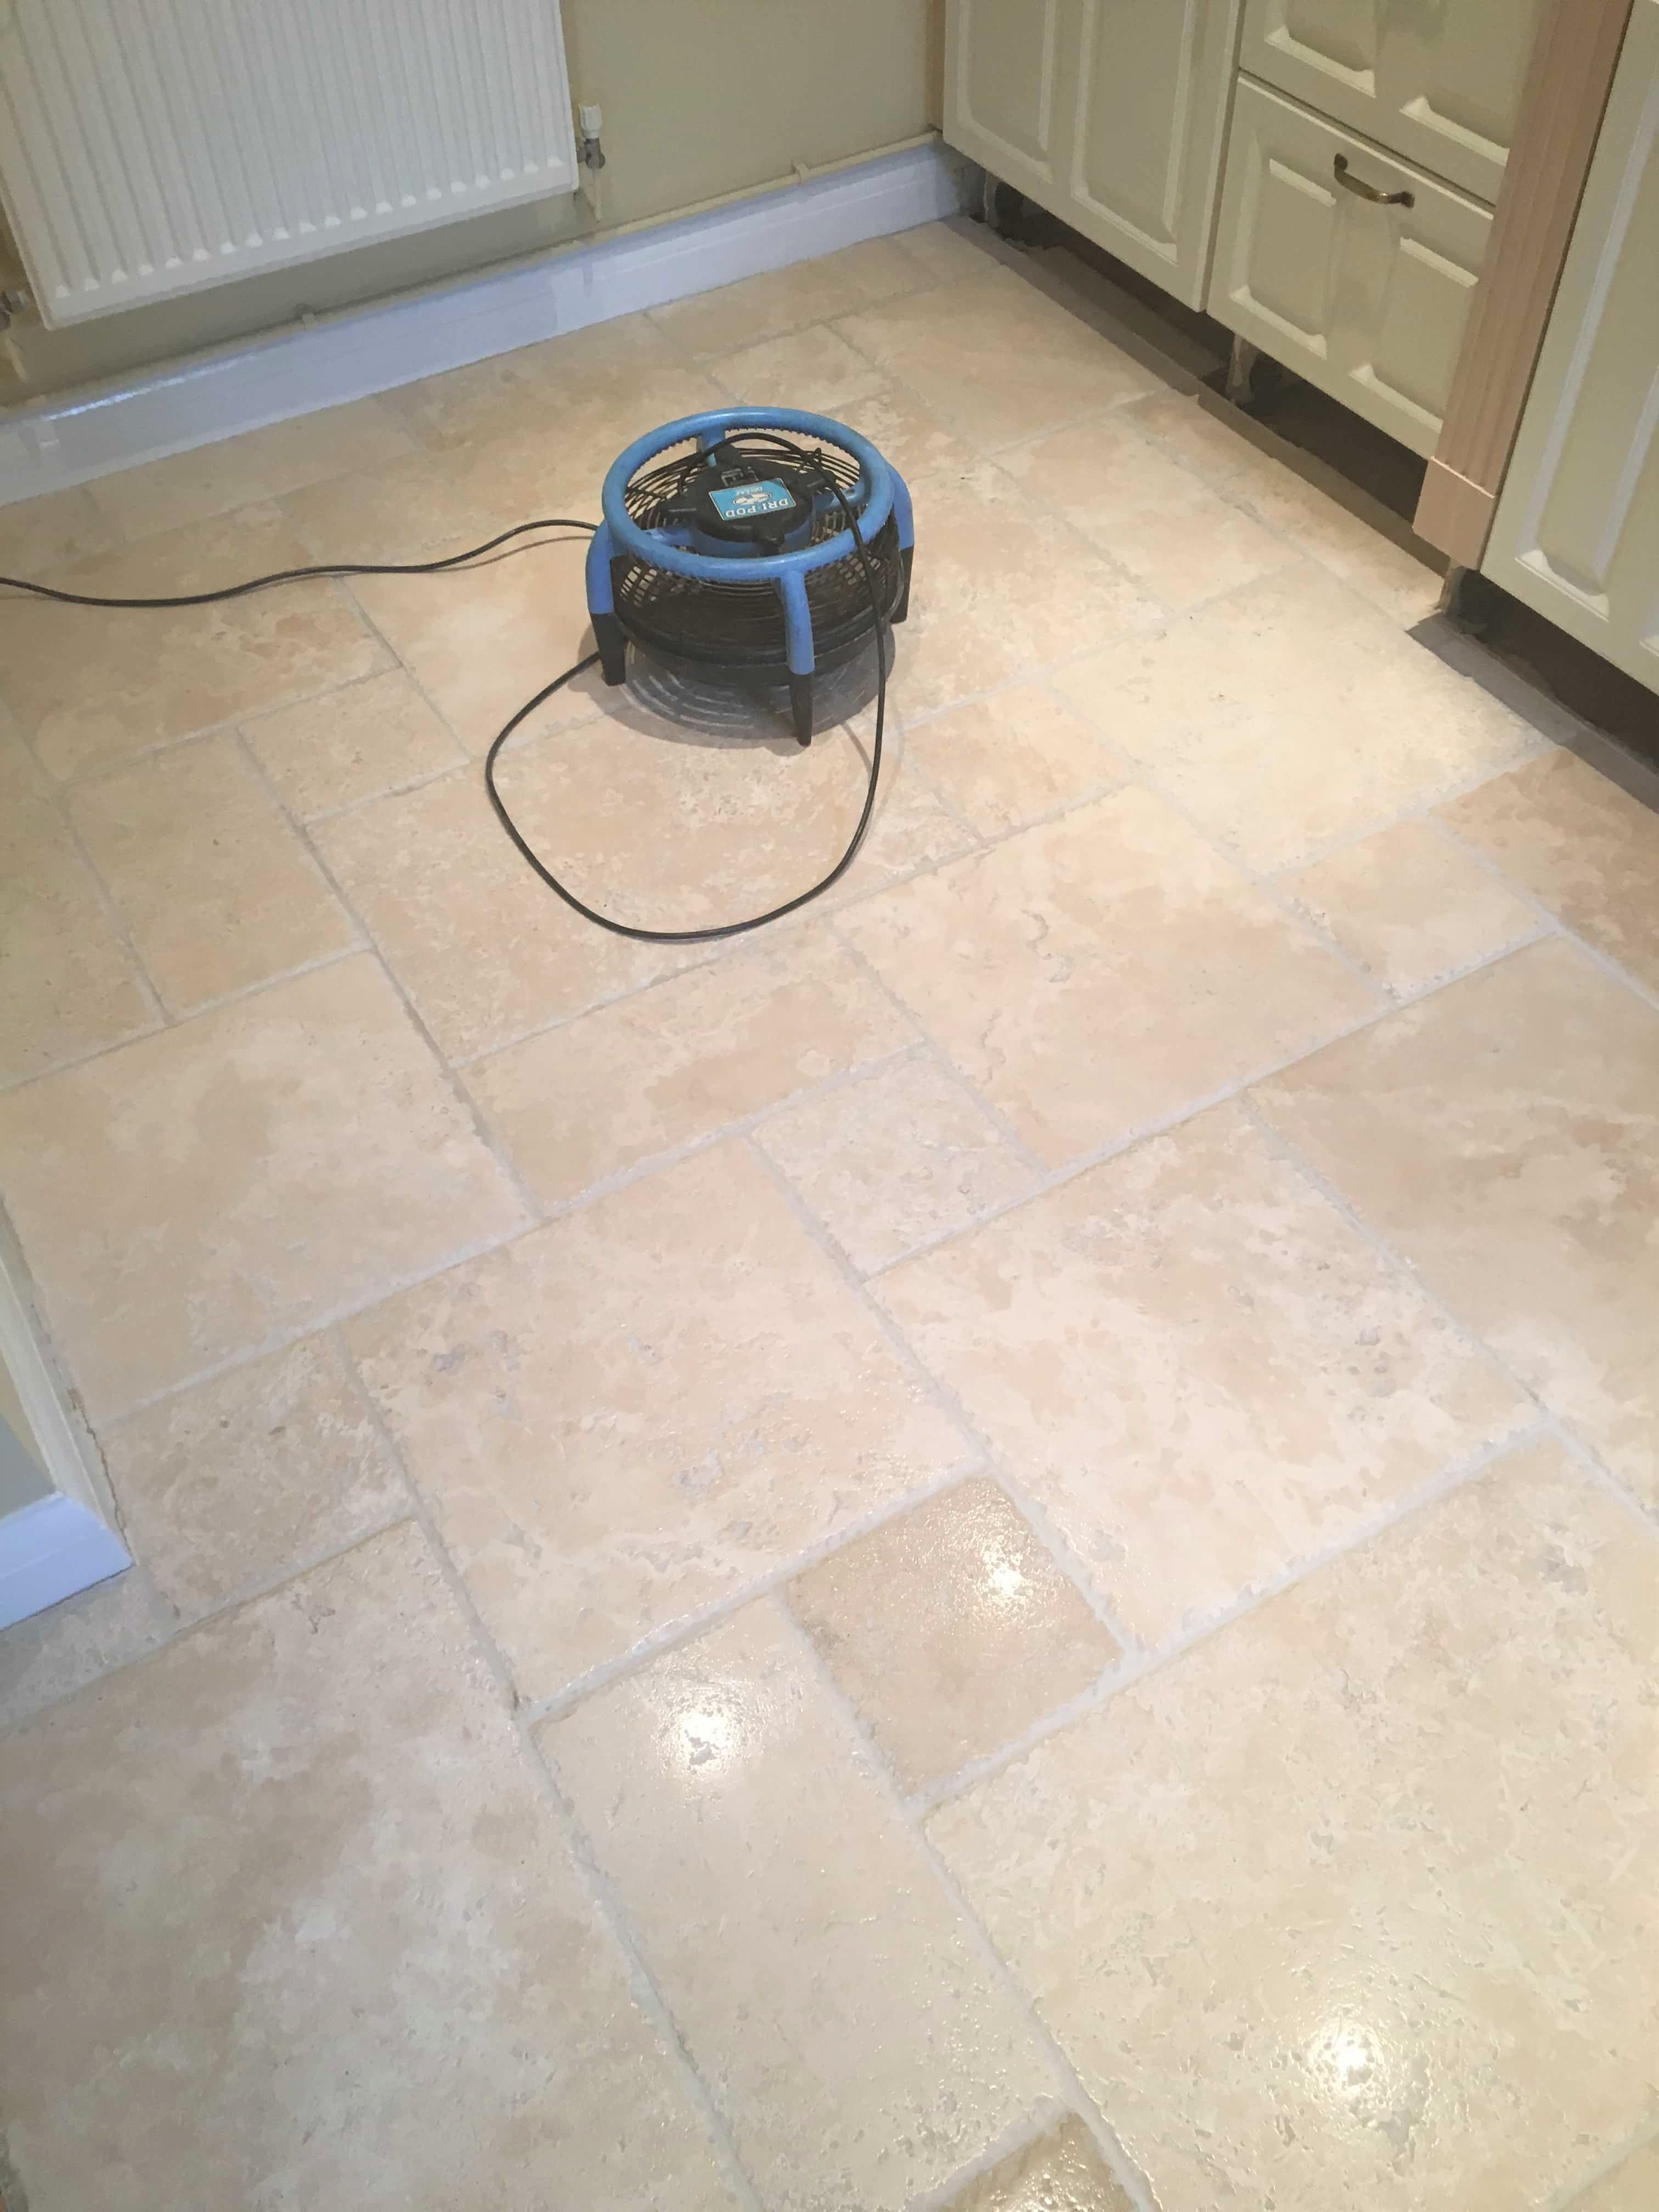 Tumbled Travertine Kitchen Floor After Cleaning Godstone